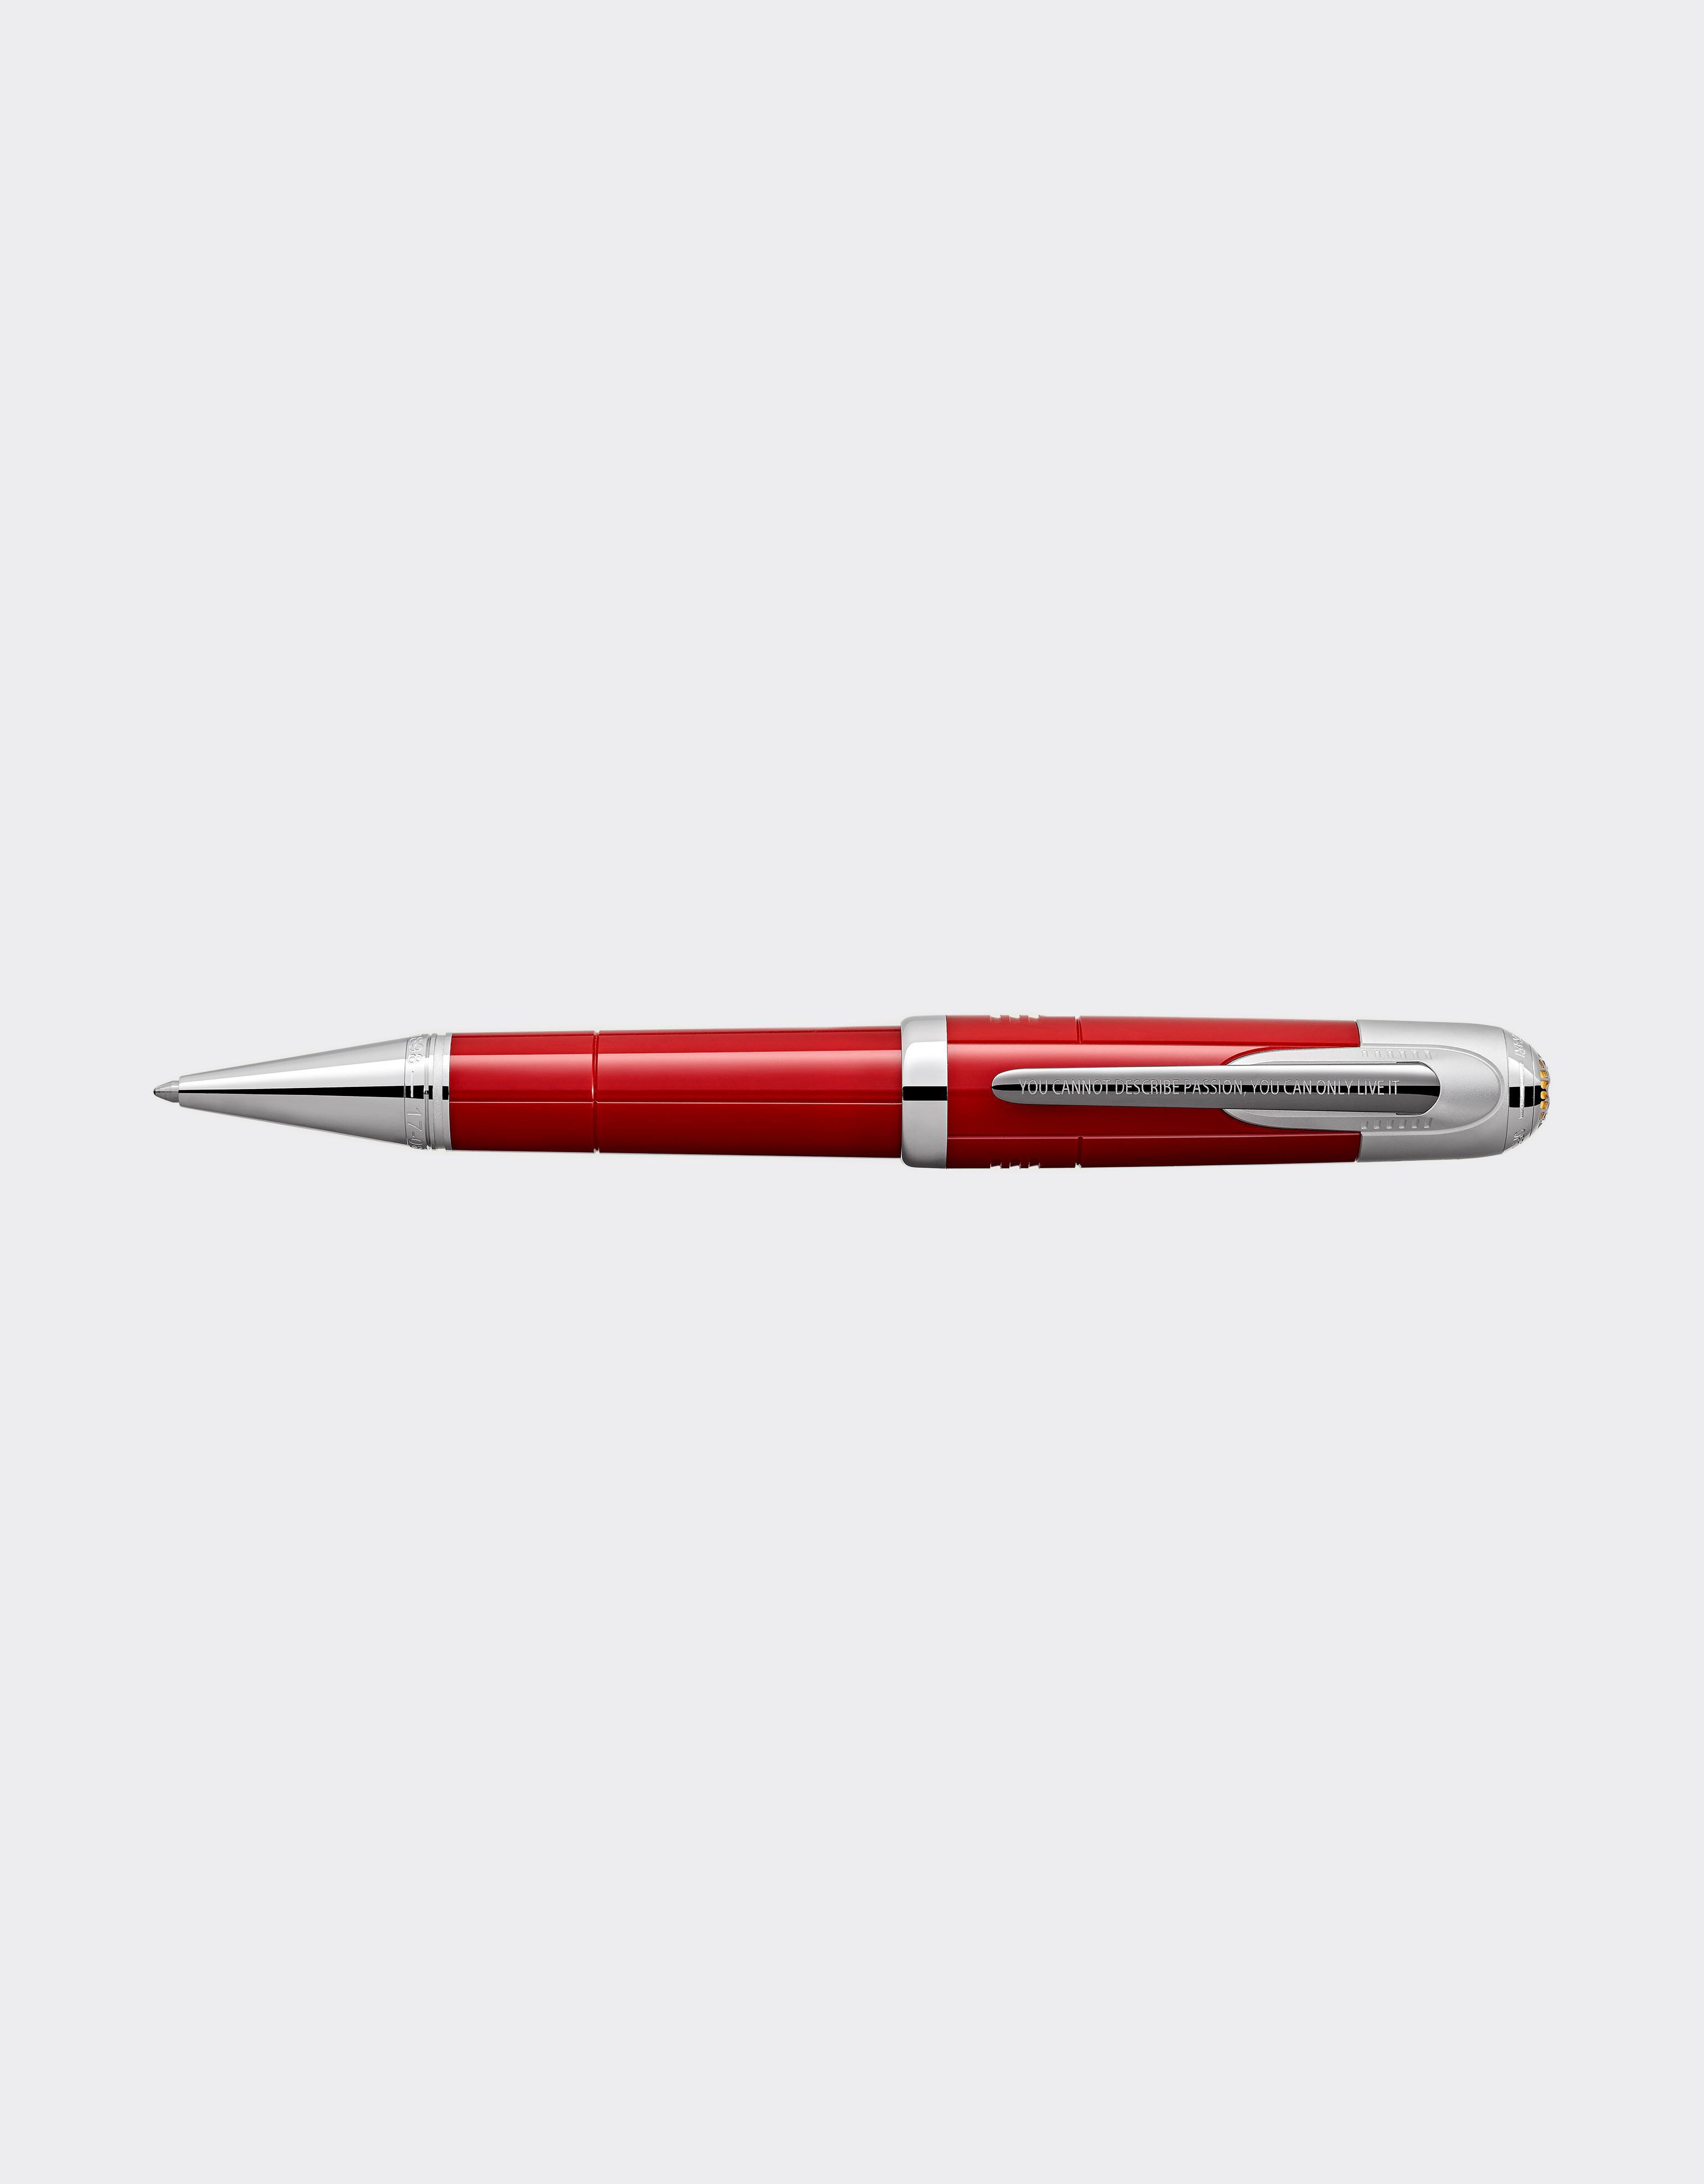 ${brand} Penna a sfera Montblanc Great Characters Enzo Ferrari Special Edition ${colorDescription} ${masterID}